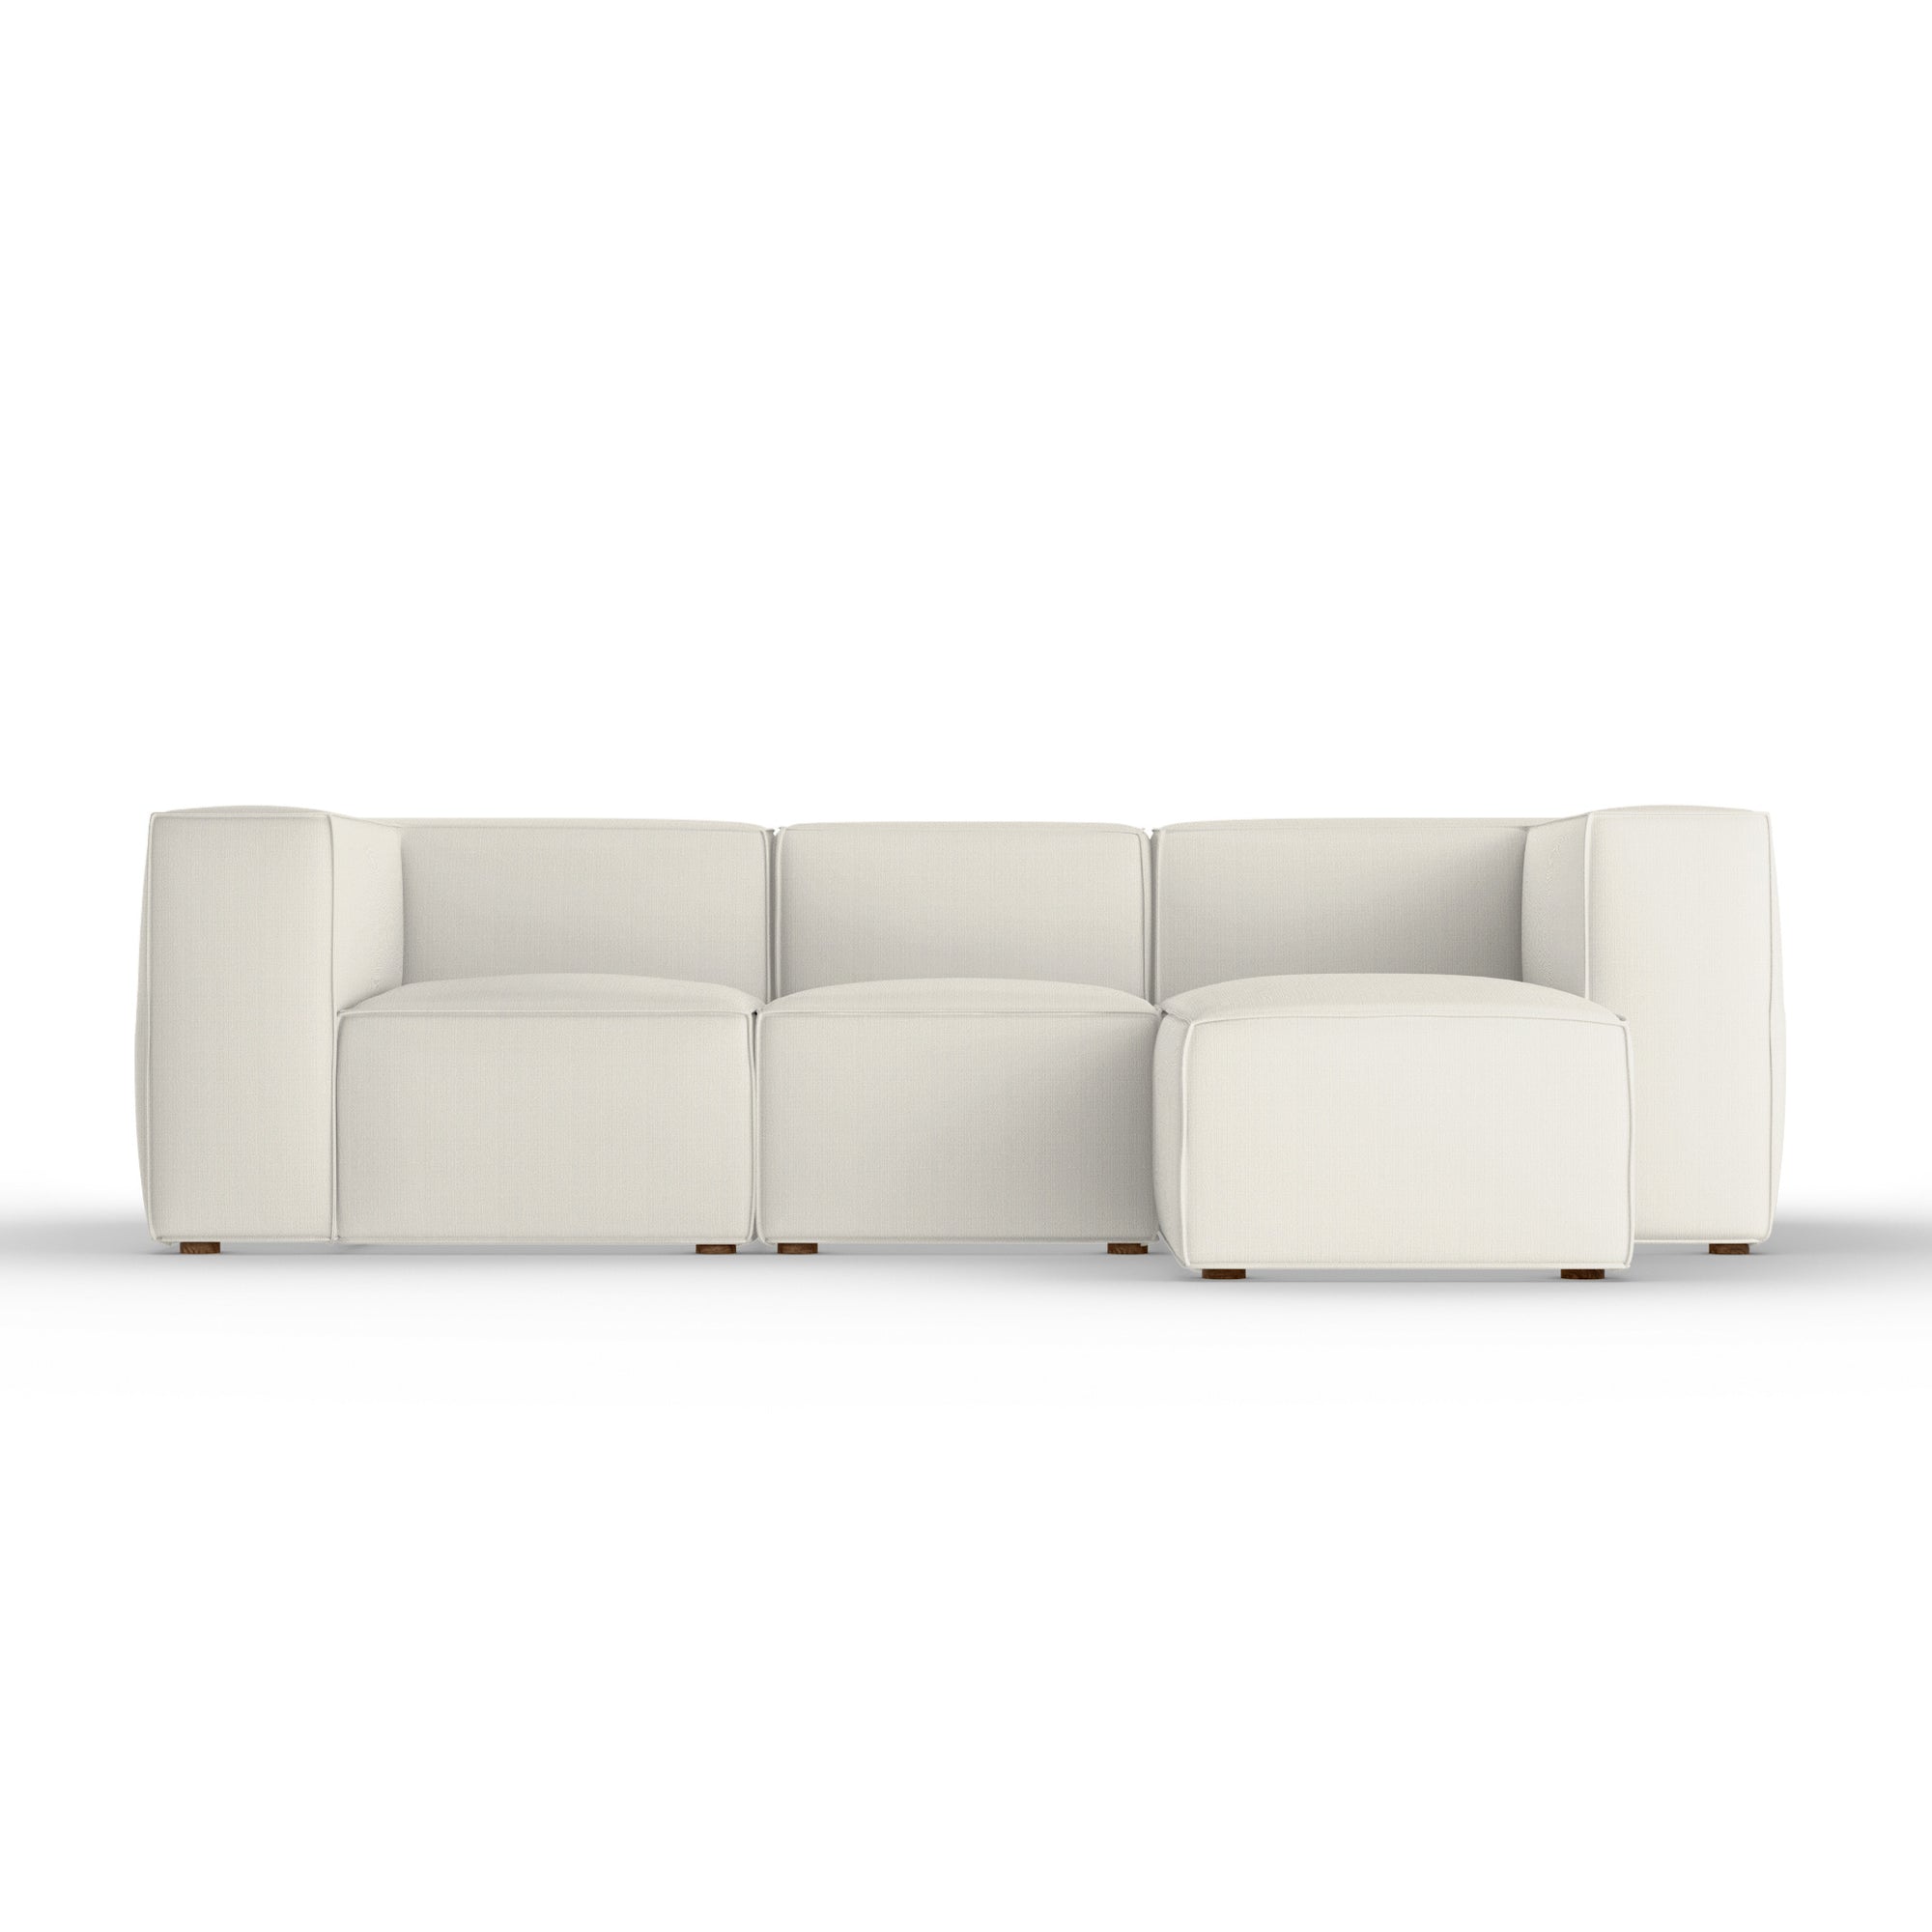 Varick Right-Chaise Sectional - Alabaster Box Weave Linen